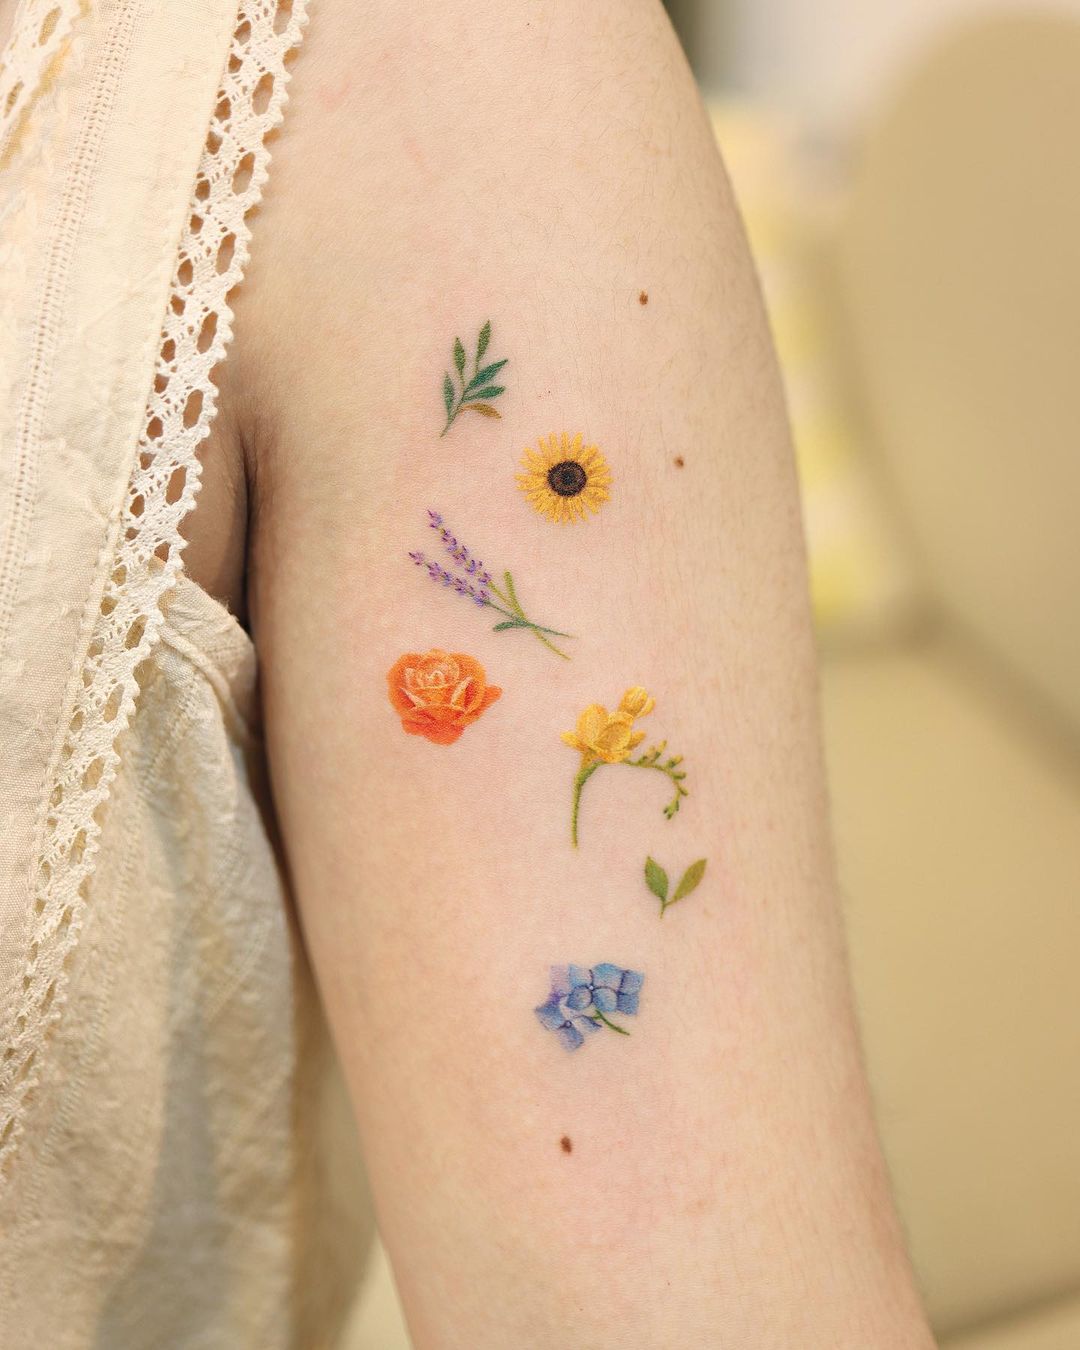 Minimalist Flower Tattoo Designs You Should Get According To Your  Personality  Cultura Colectiva